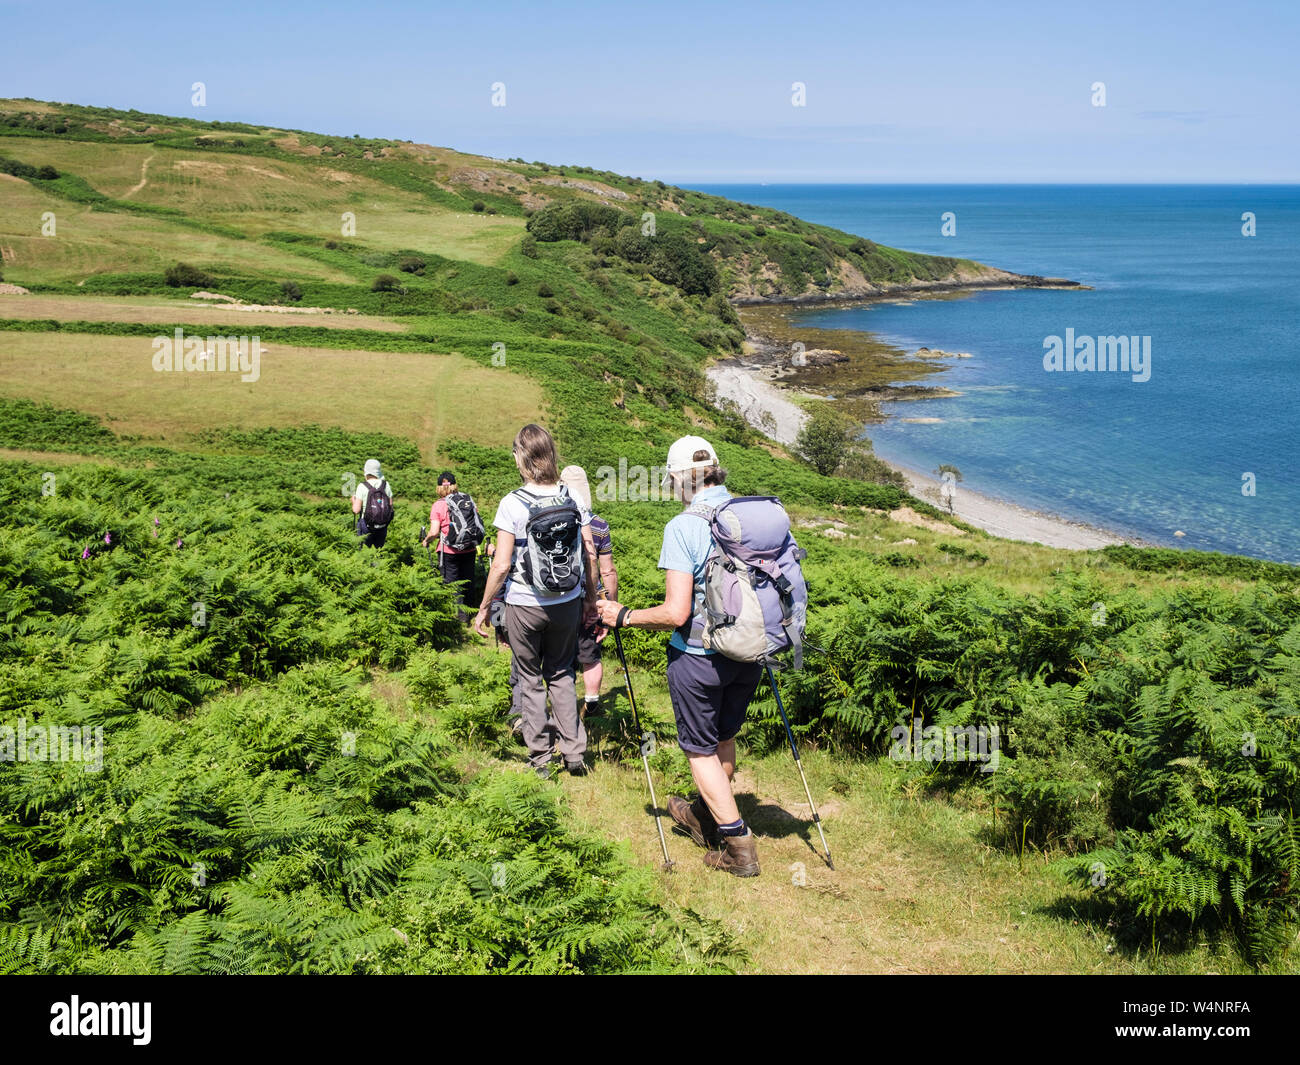 Hikers walking on scenic Anglesey Coastal Path through bracken in summer. Porthygwichiaid, Llaneilian, Isle of Anglesey, north Wales, UK, Britain Stock Photo